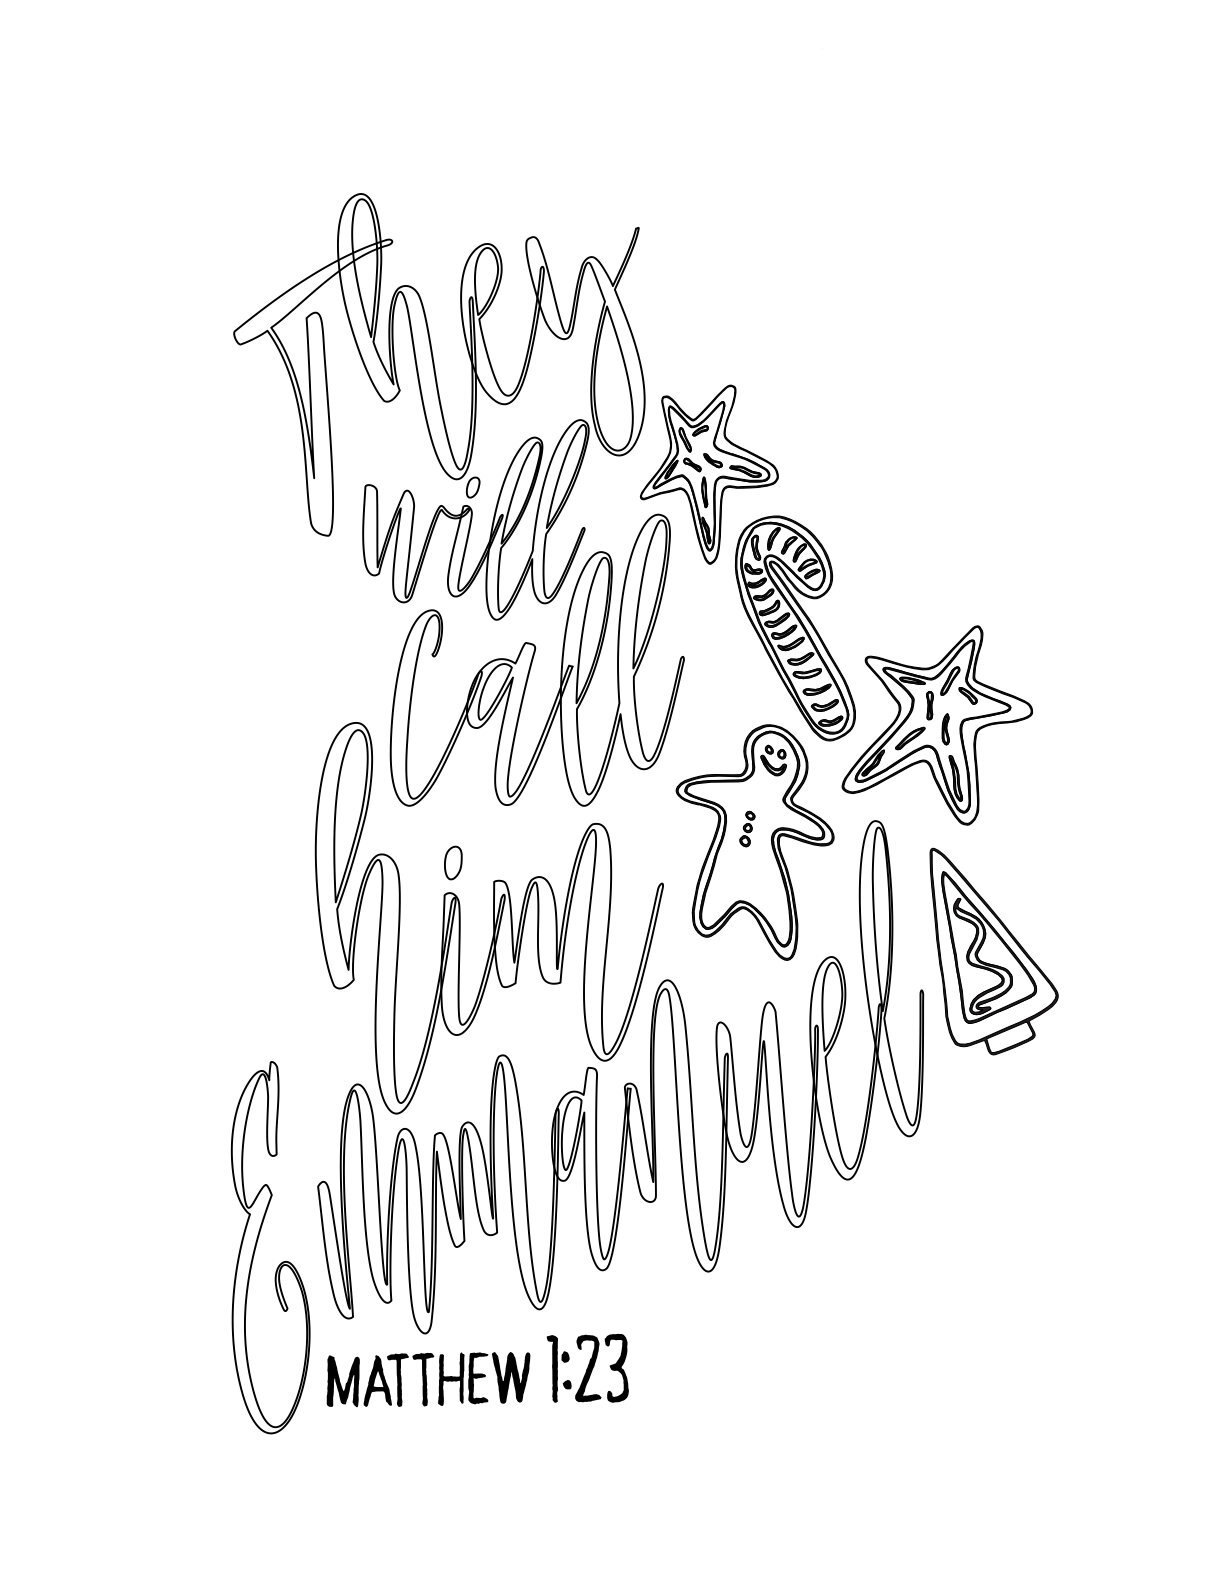 Free Advent Coloring Page - They Will Call Him Emmanuel - Matthew 1:23 Christmas Printable CLICK HERE TO DOWNLOAD YOUR FREE PRINTABLE CHRISTMAS COLORING PAGE